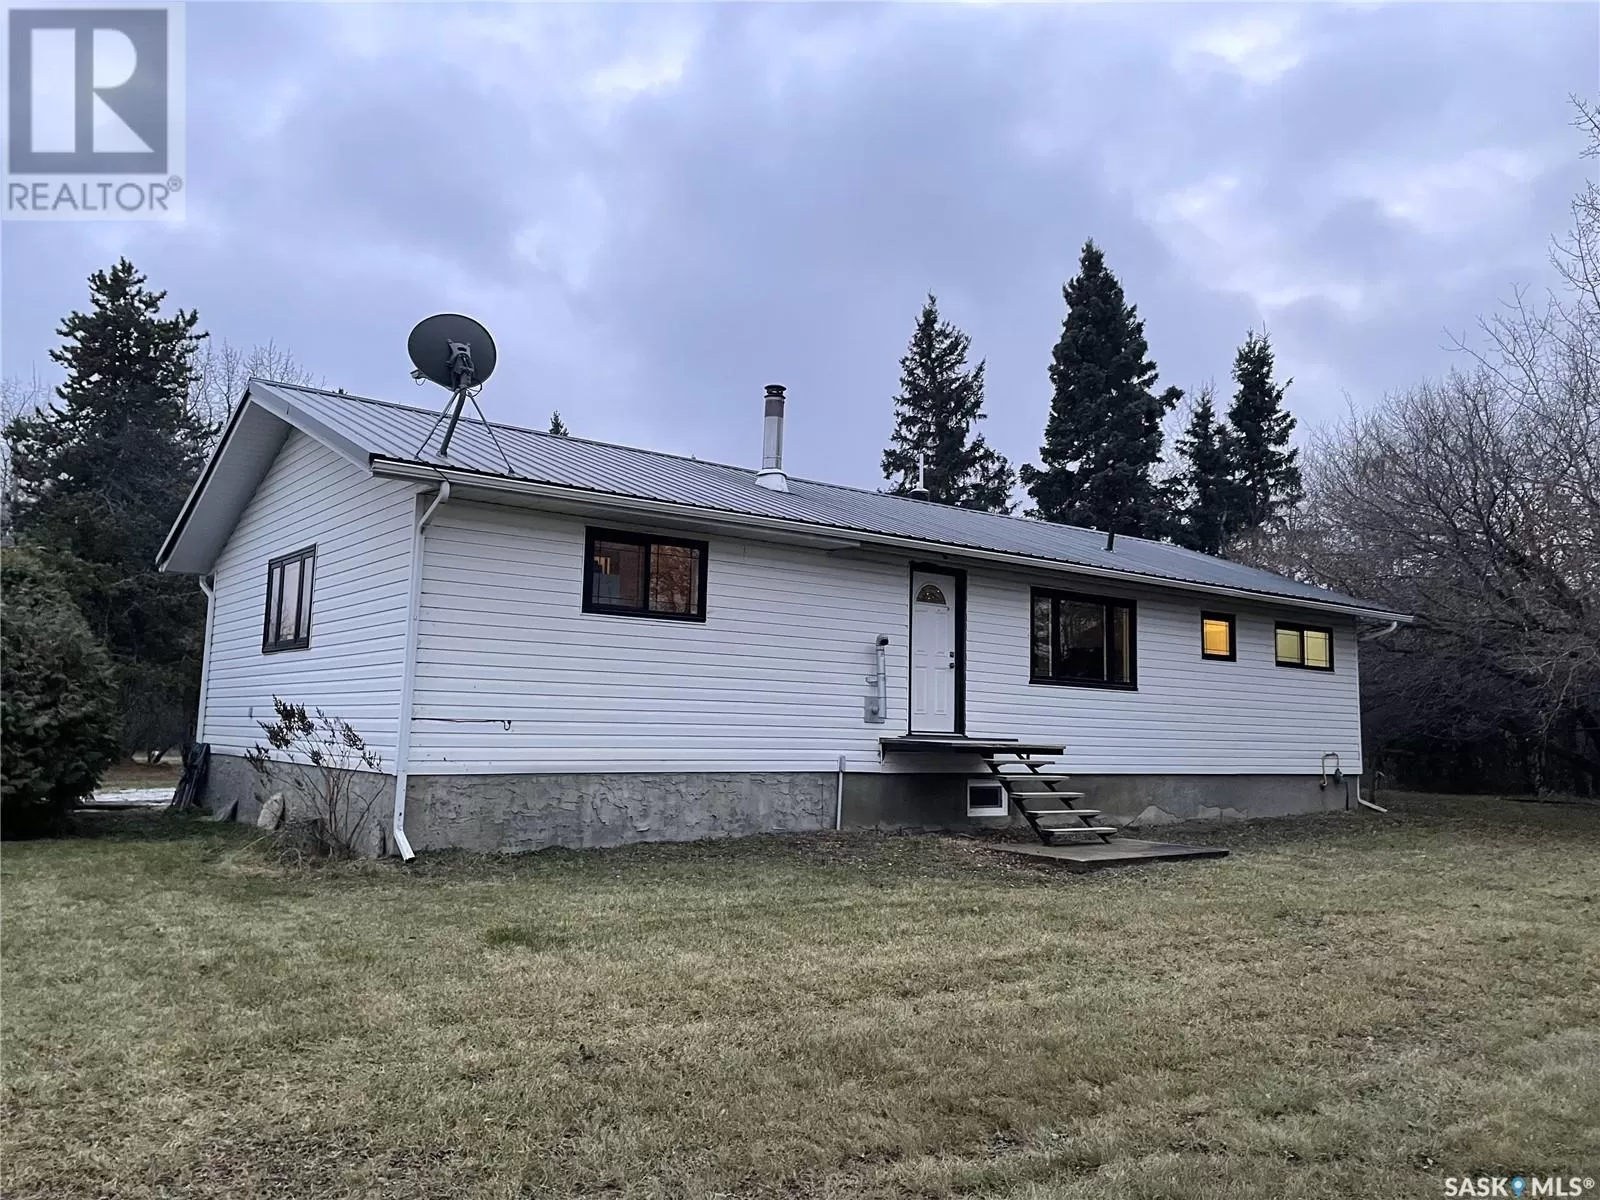 House for rent: 10 Acres South Of Meadow Lake, Meadow Lake Rm No.588, Saskatchewan S9X 1Y5